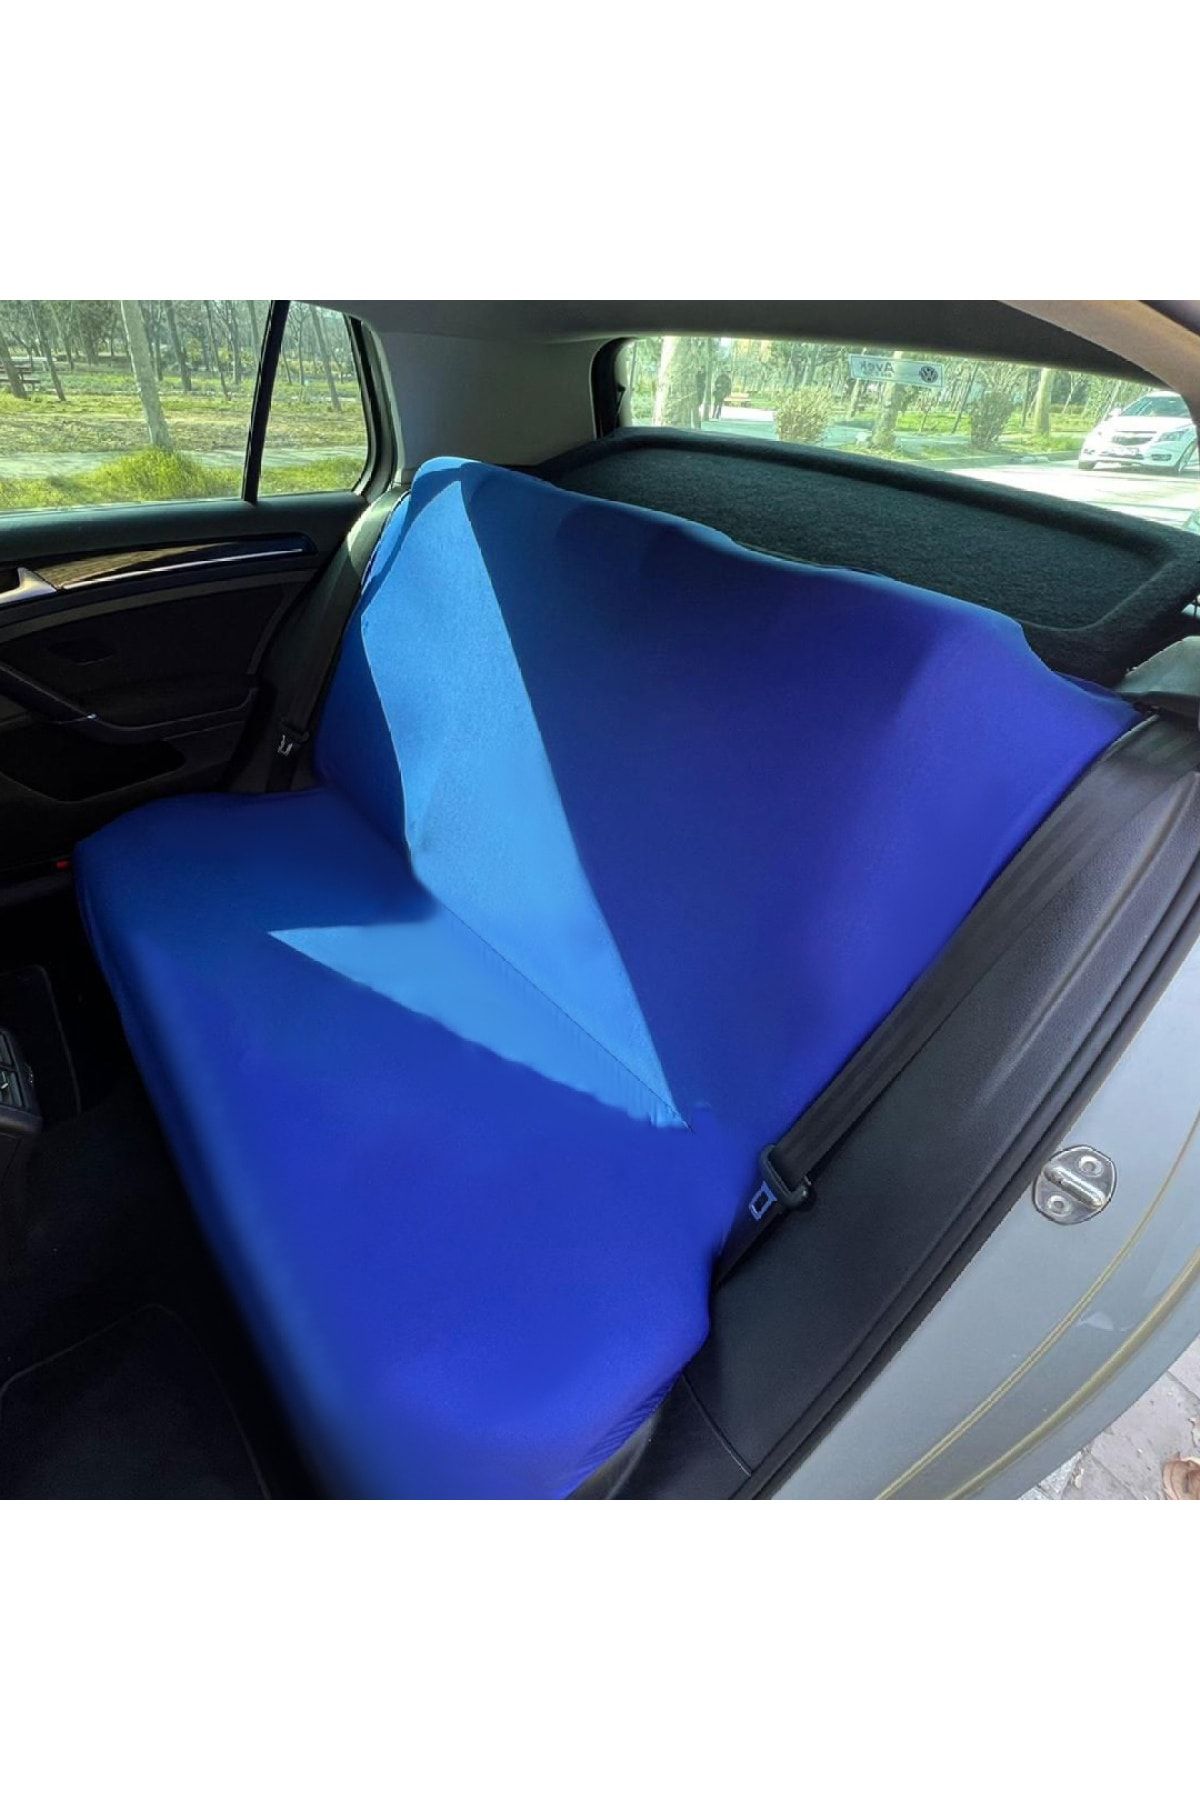 Teksin Renault Twingo Car Seat Service Cover Blue Lycra Flexible Universal  Suitable for All Vehicle Models - Trendyol